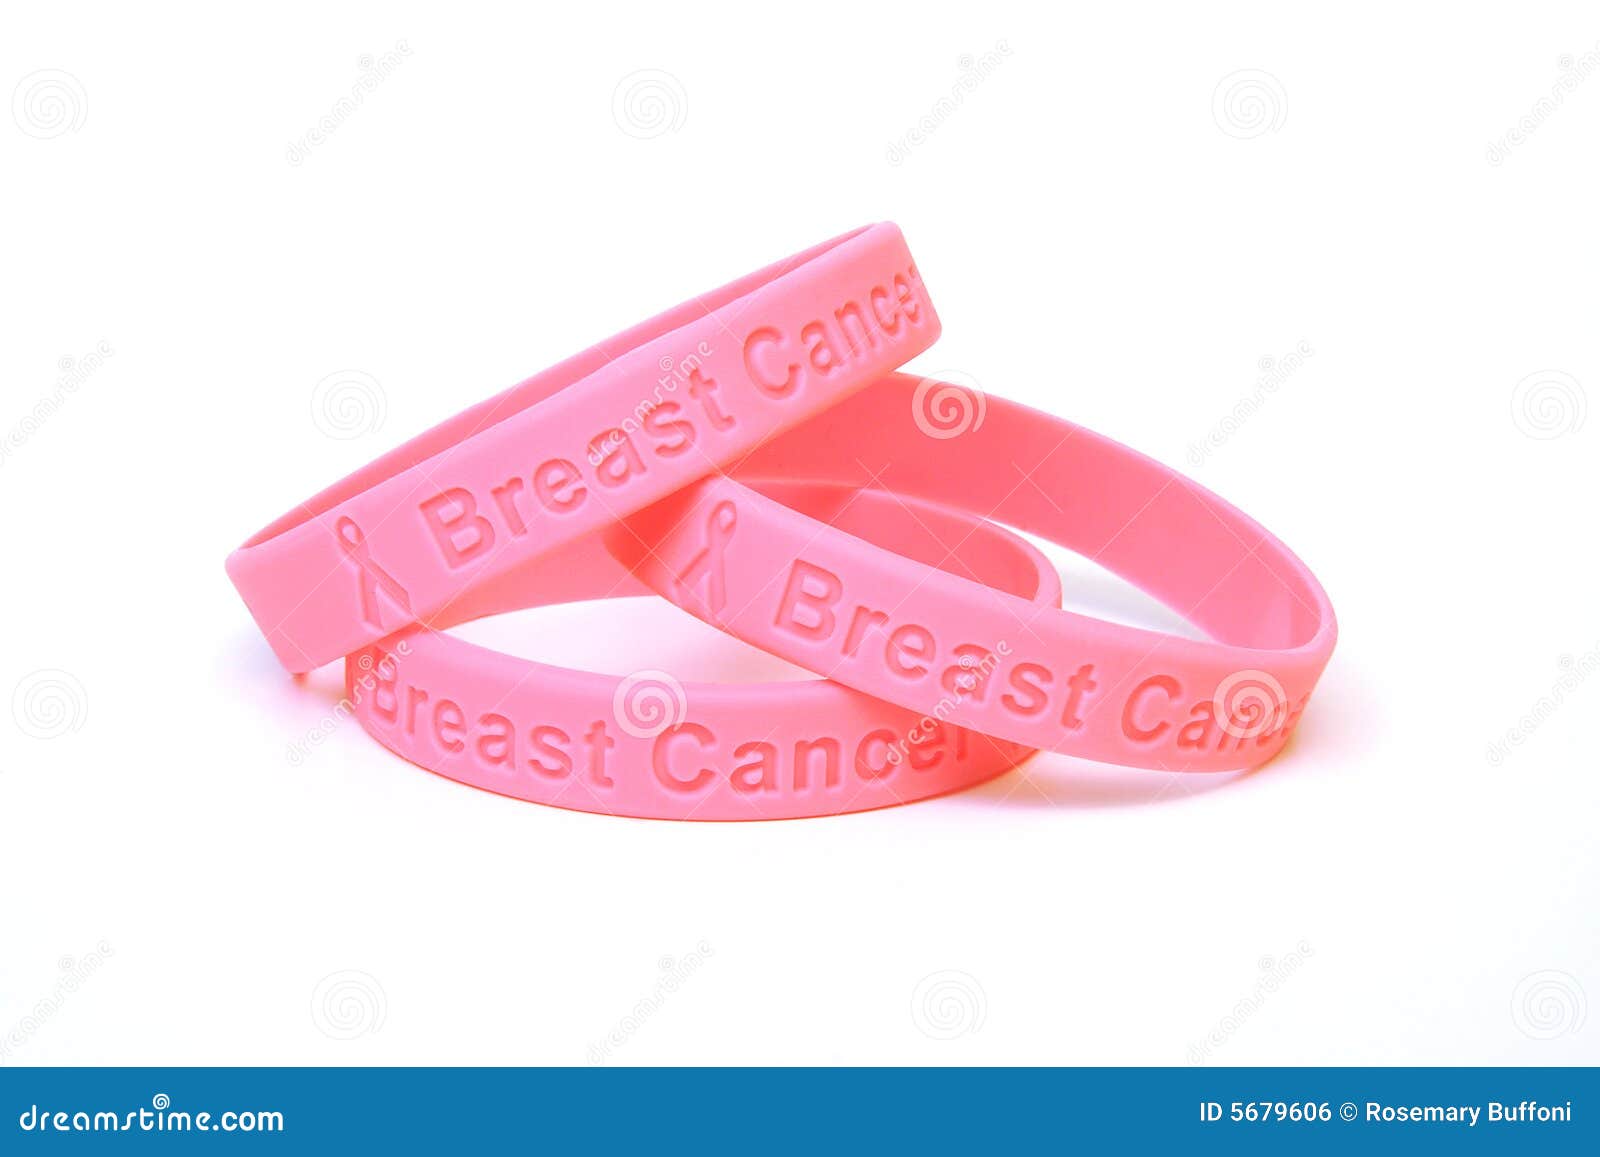 Breast Cancer Awareness Silicone Bracelet – Combat Breast Cancer